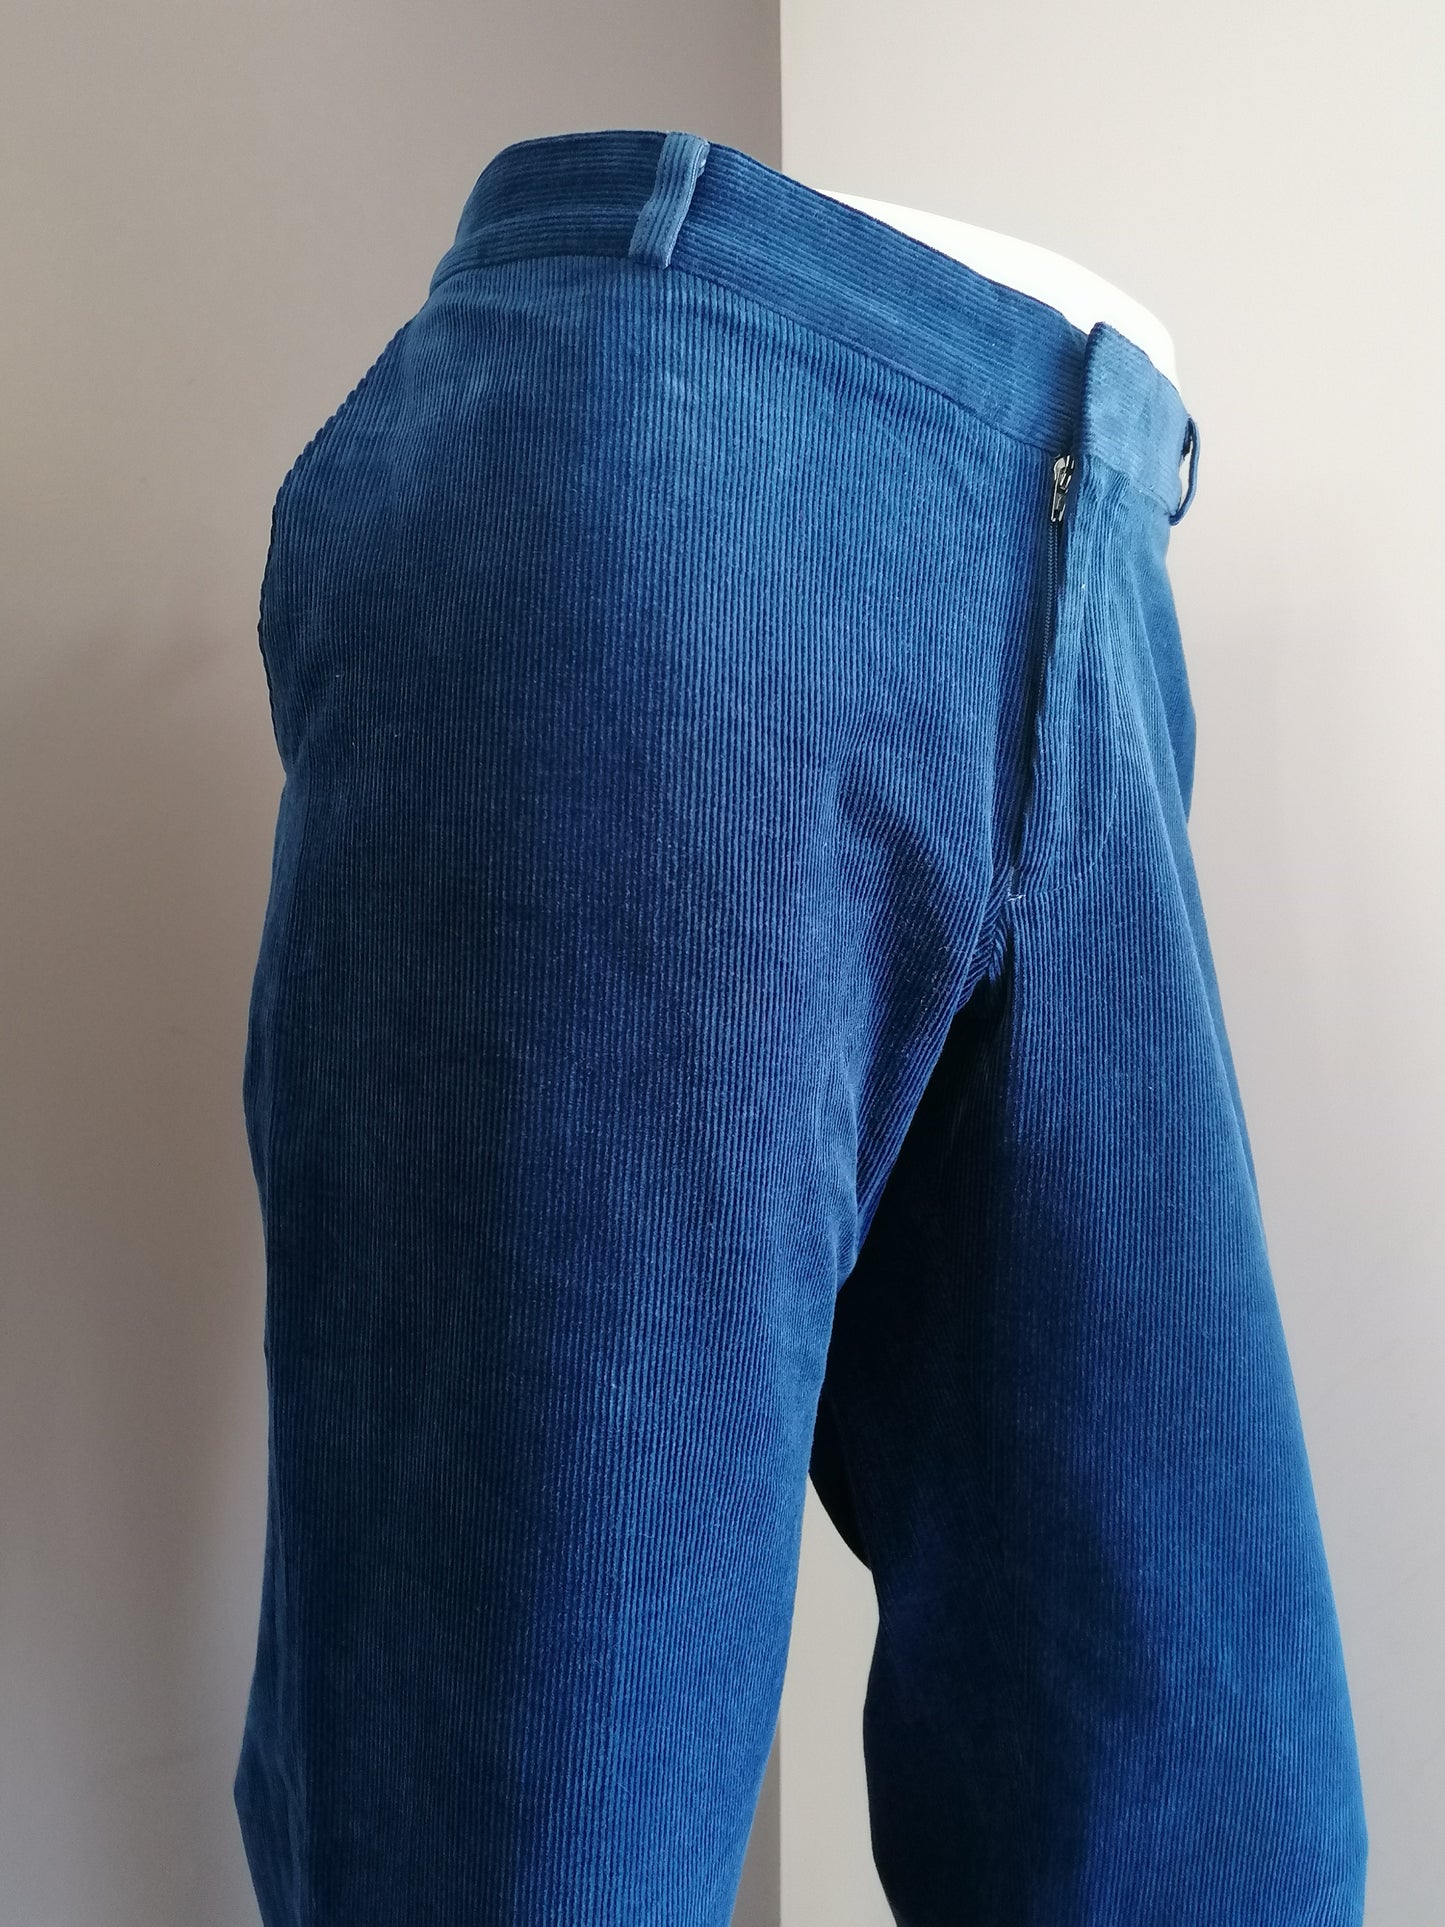 Comfort stretch rib pants / trousers. Blue colored. Size 27 (54/L)